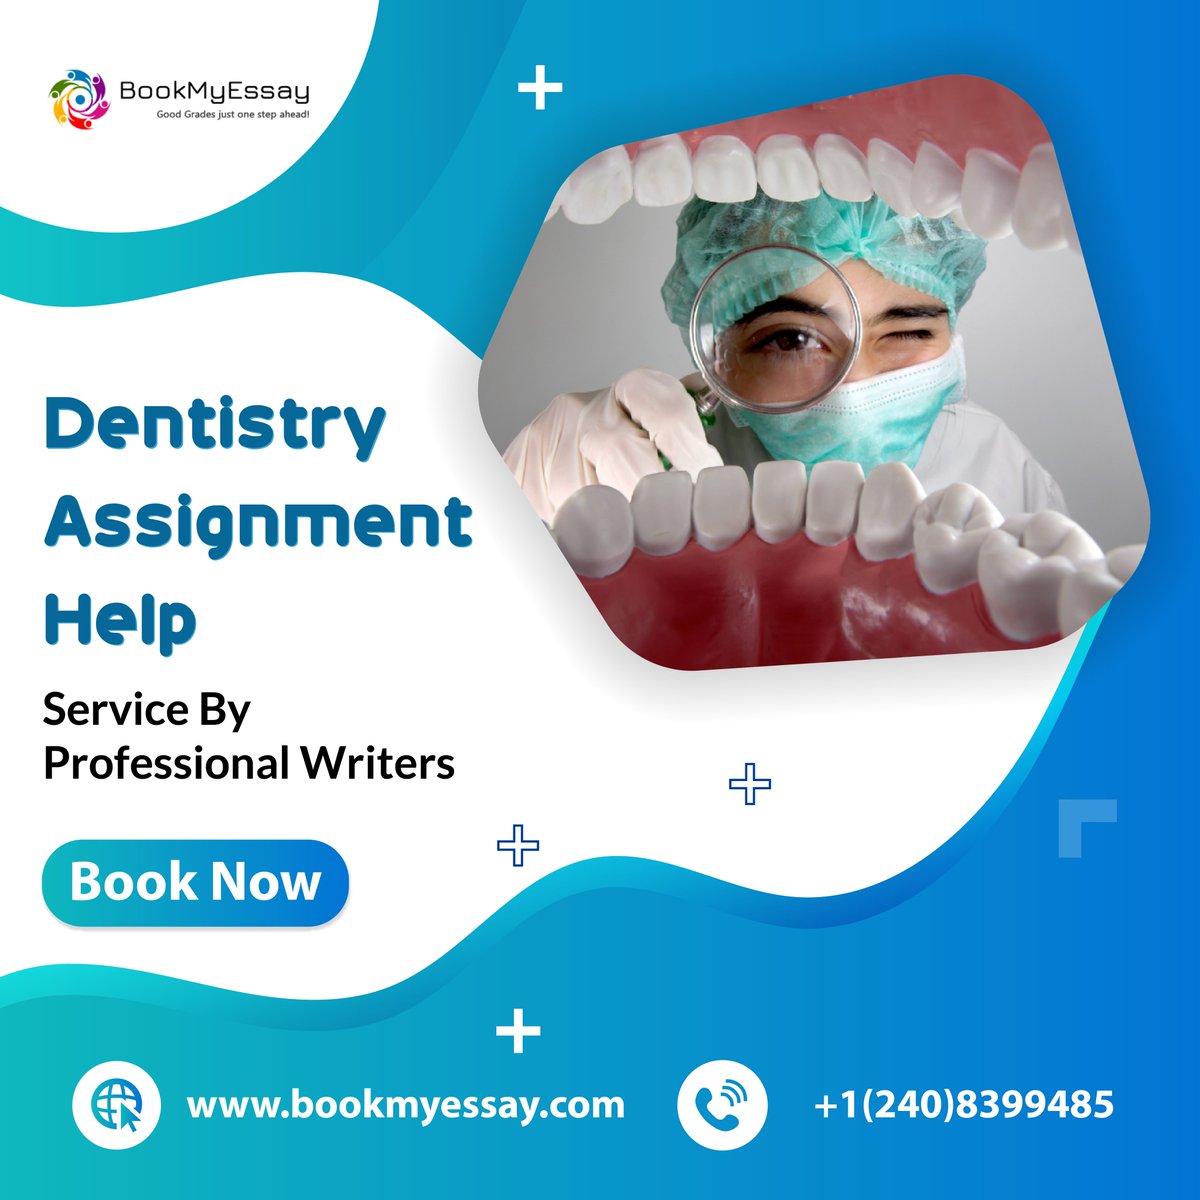 🦷 Need assistance with your dentistry #assignments? Look no further! 📚 BookMyEssay offers expert #DentistryAssignmentHelp tailored to your academic needs.

Visit Us Now:- 👇

bookmyessay.com.au

📞WhatsApp - +1(240)8399485

#ExpertAssistance #TopGrades #AcademicSuccess